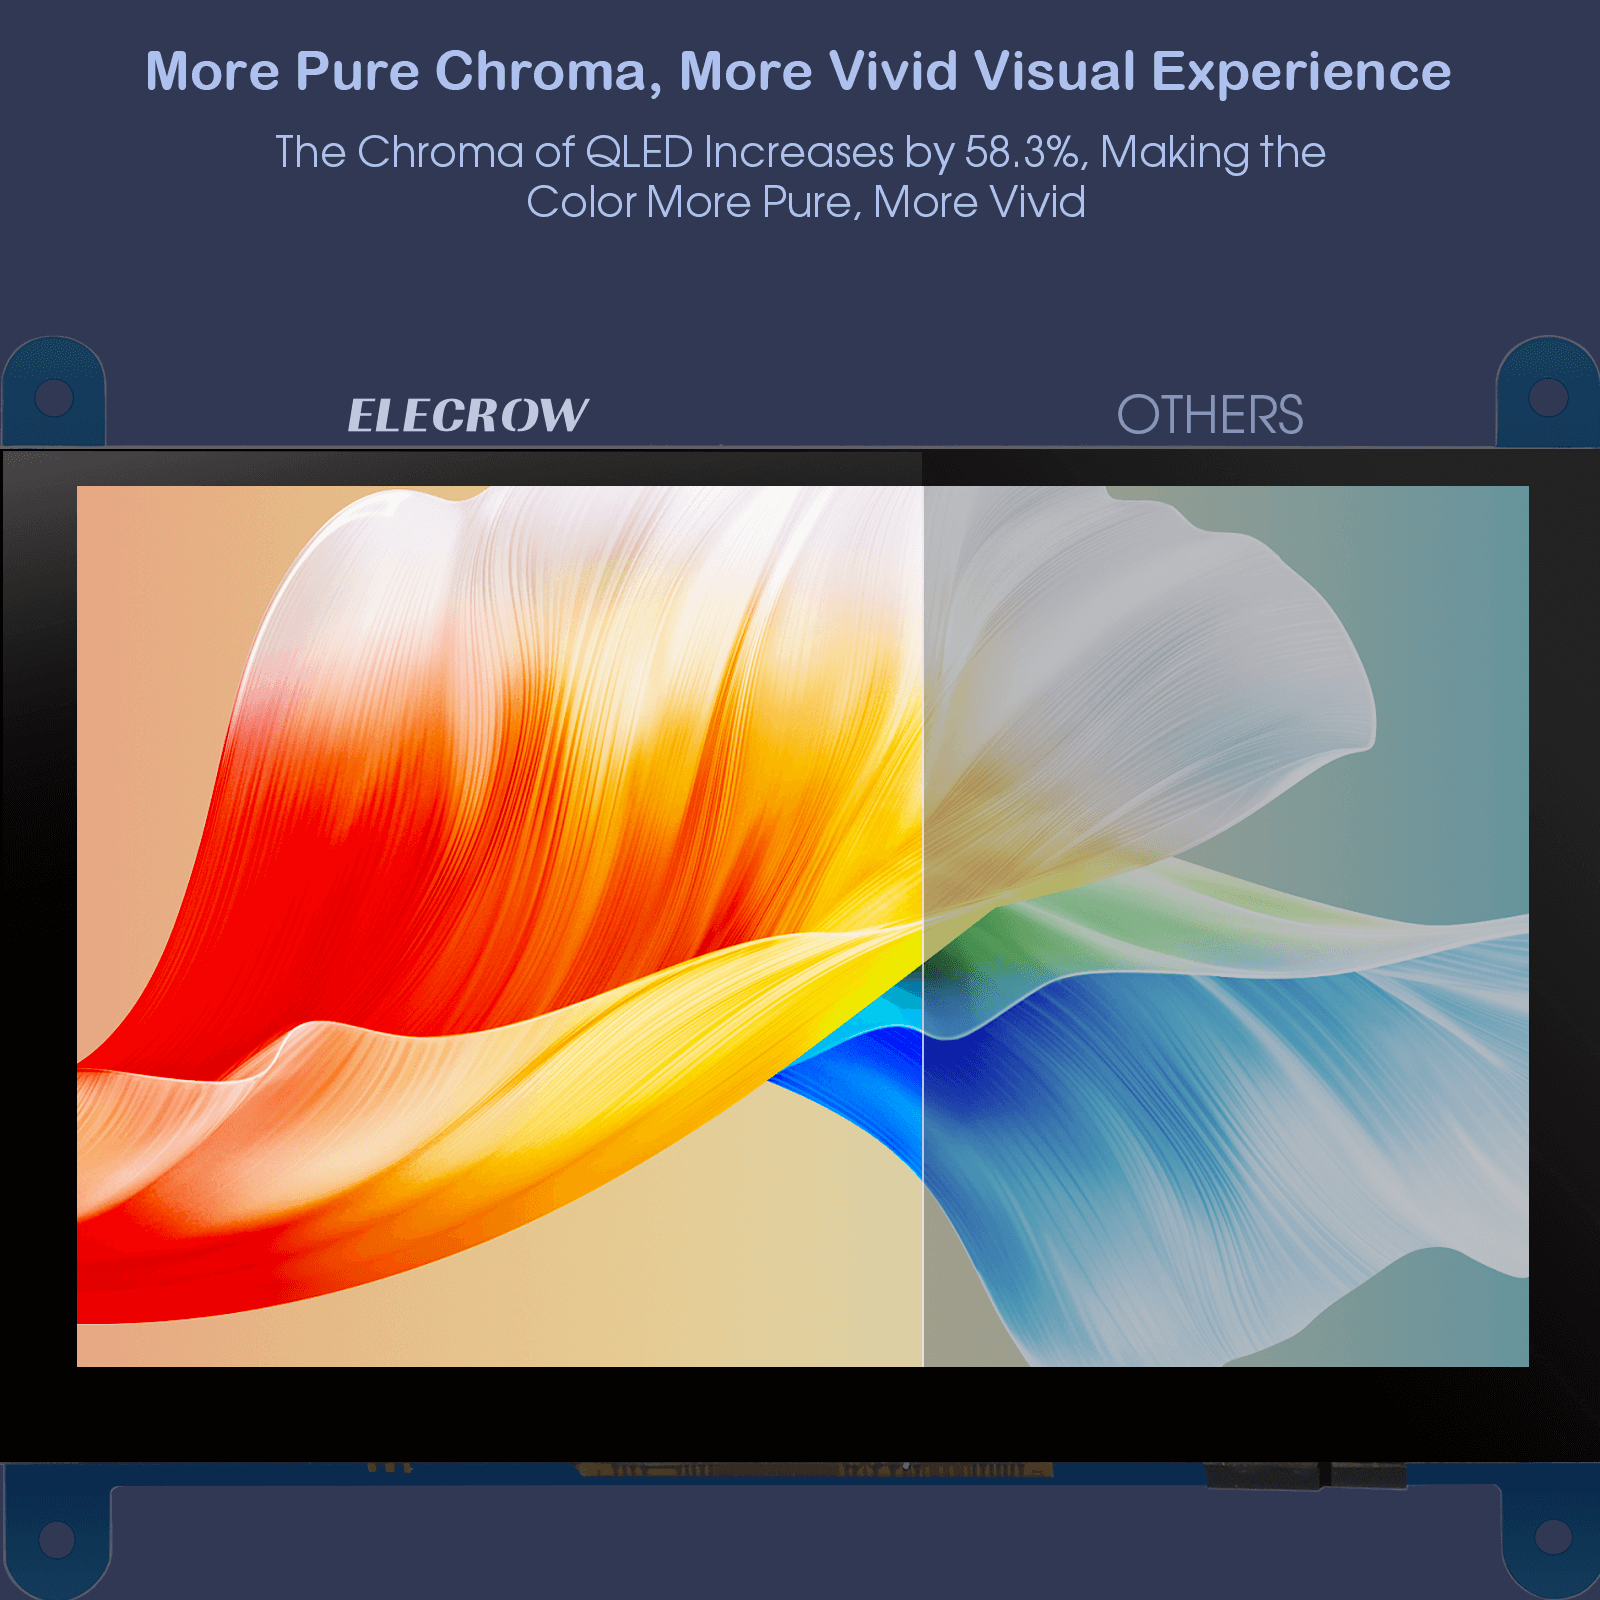 5 inch QLED display with more pure chroma